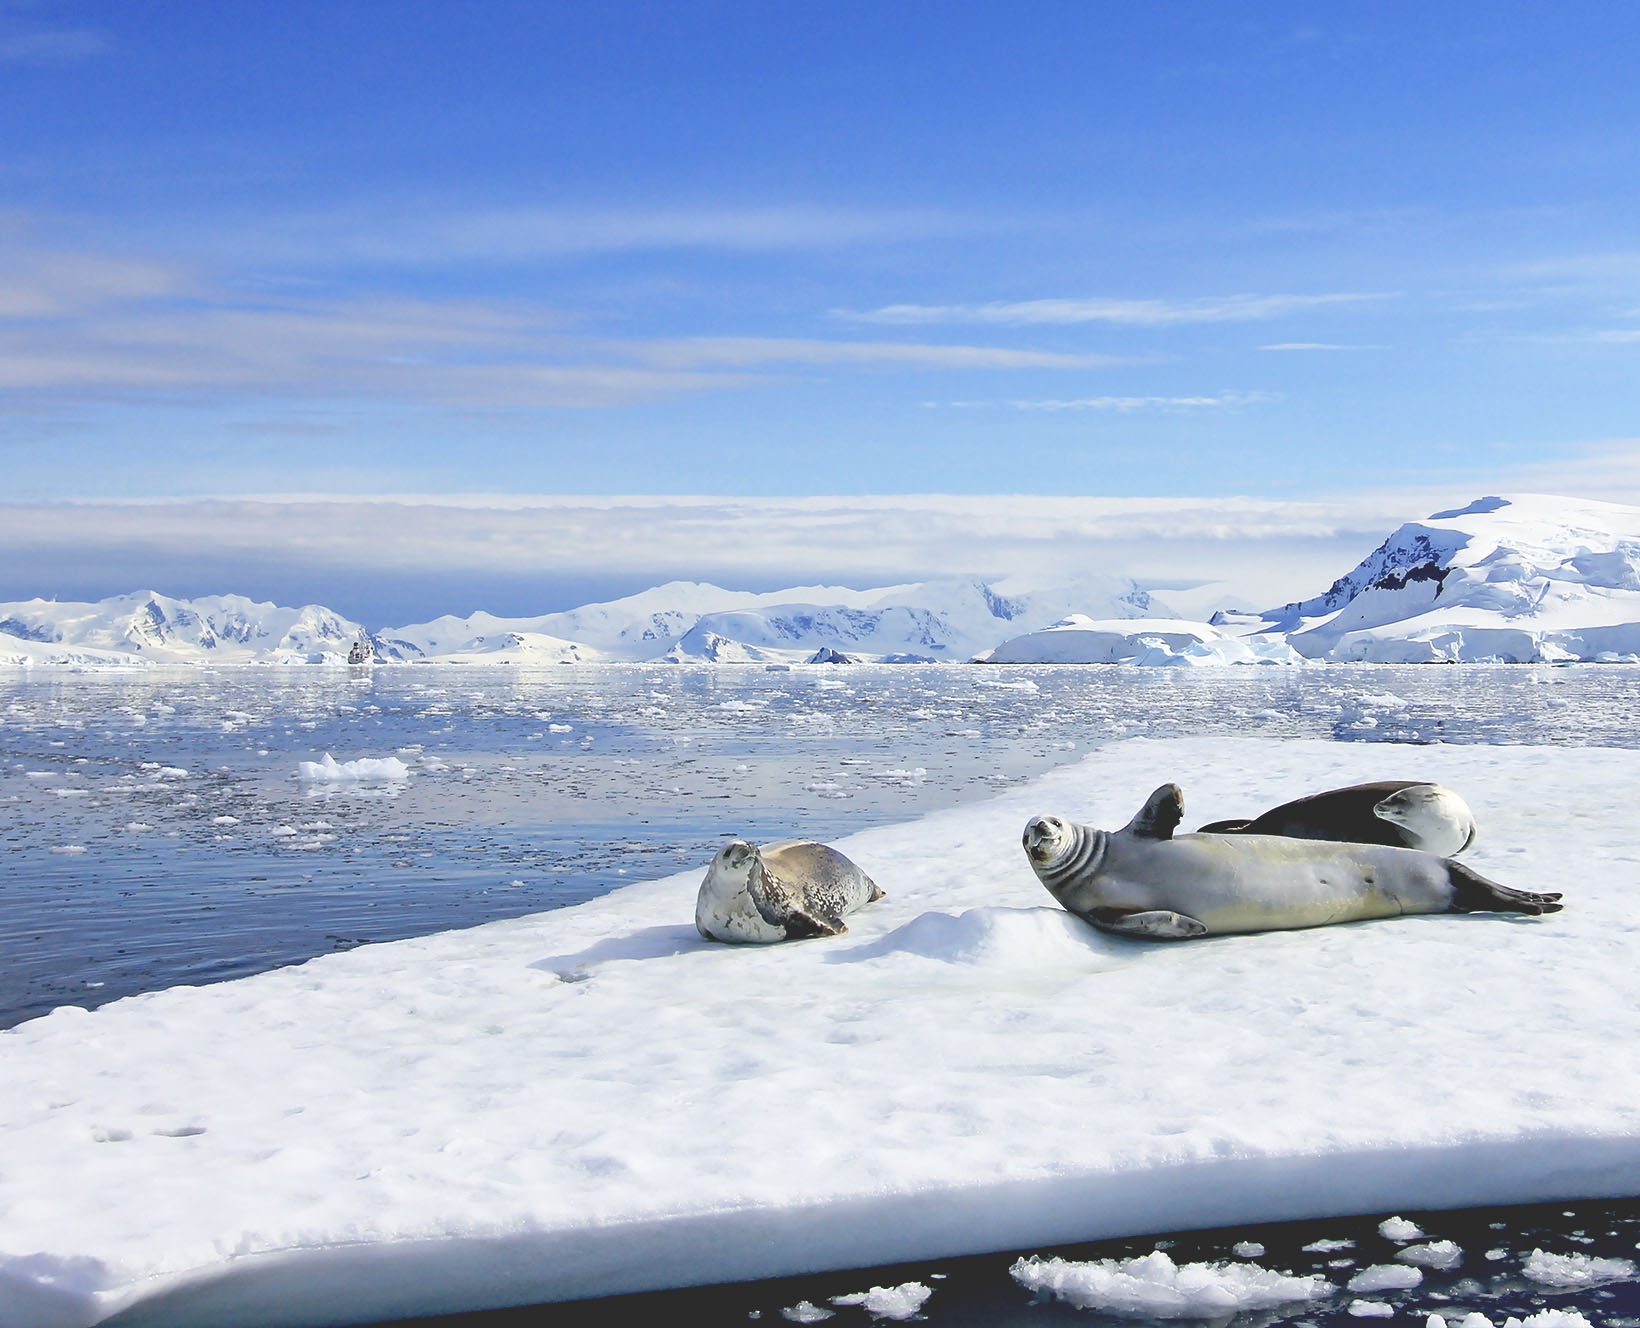 Three seals resting on the limited sea ice due to rising temperatures, changes that can be measured with location technology